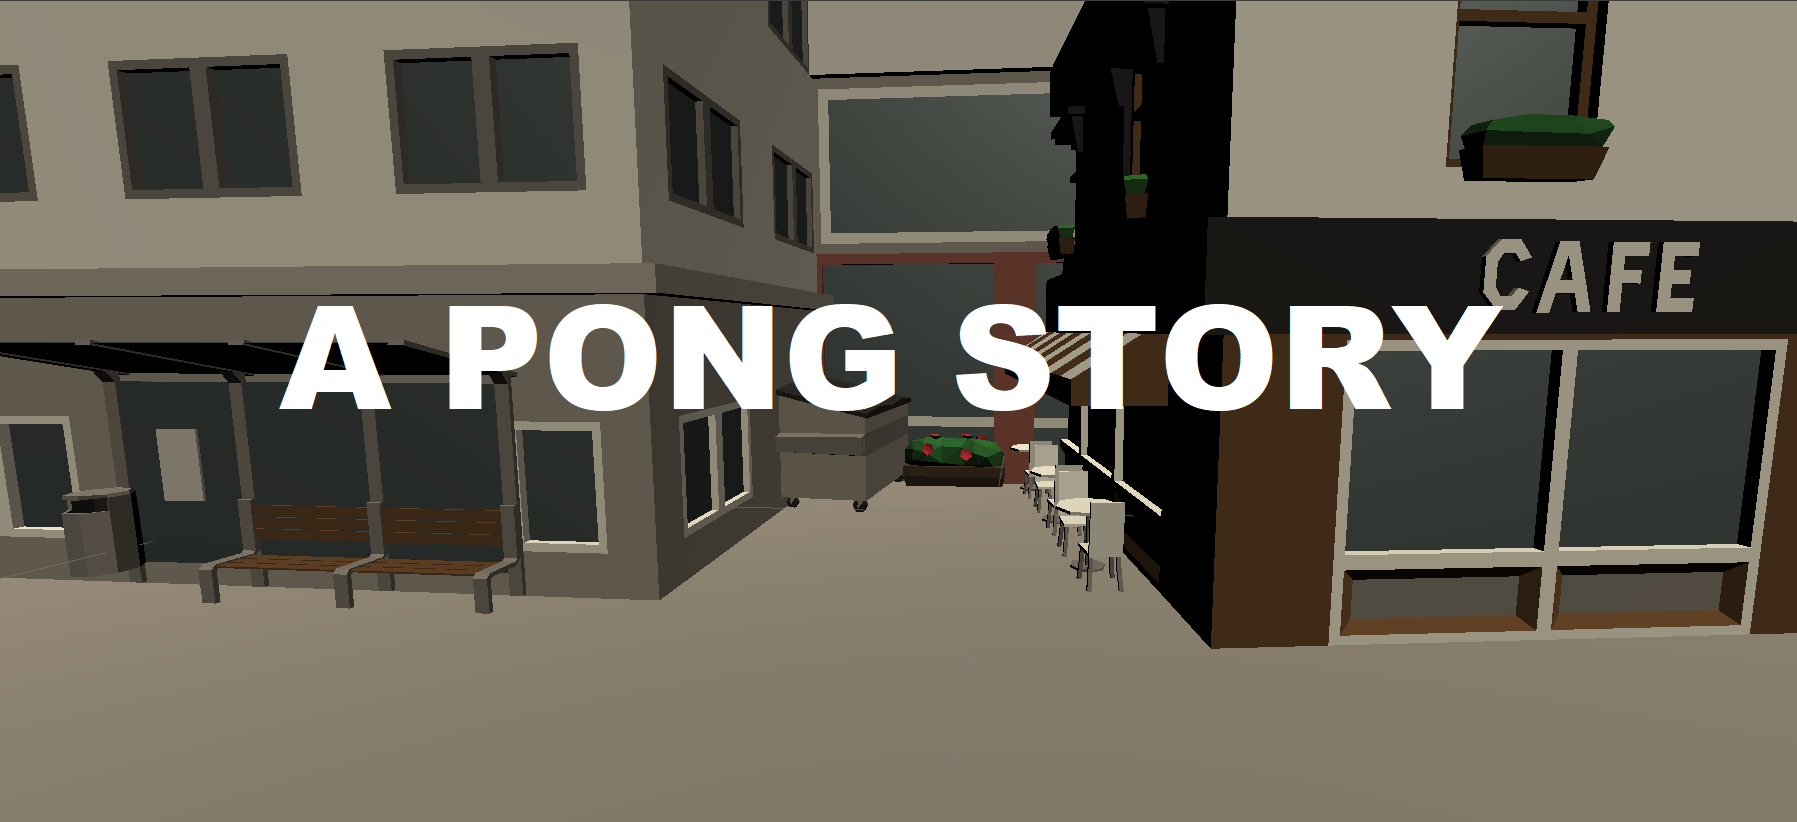 A Pong Story